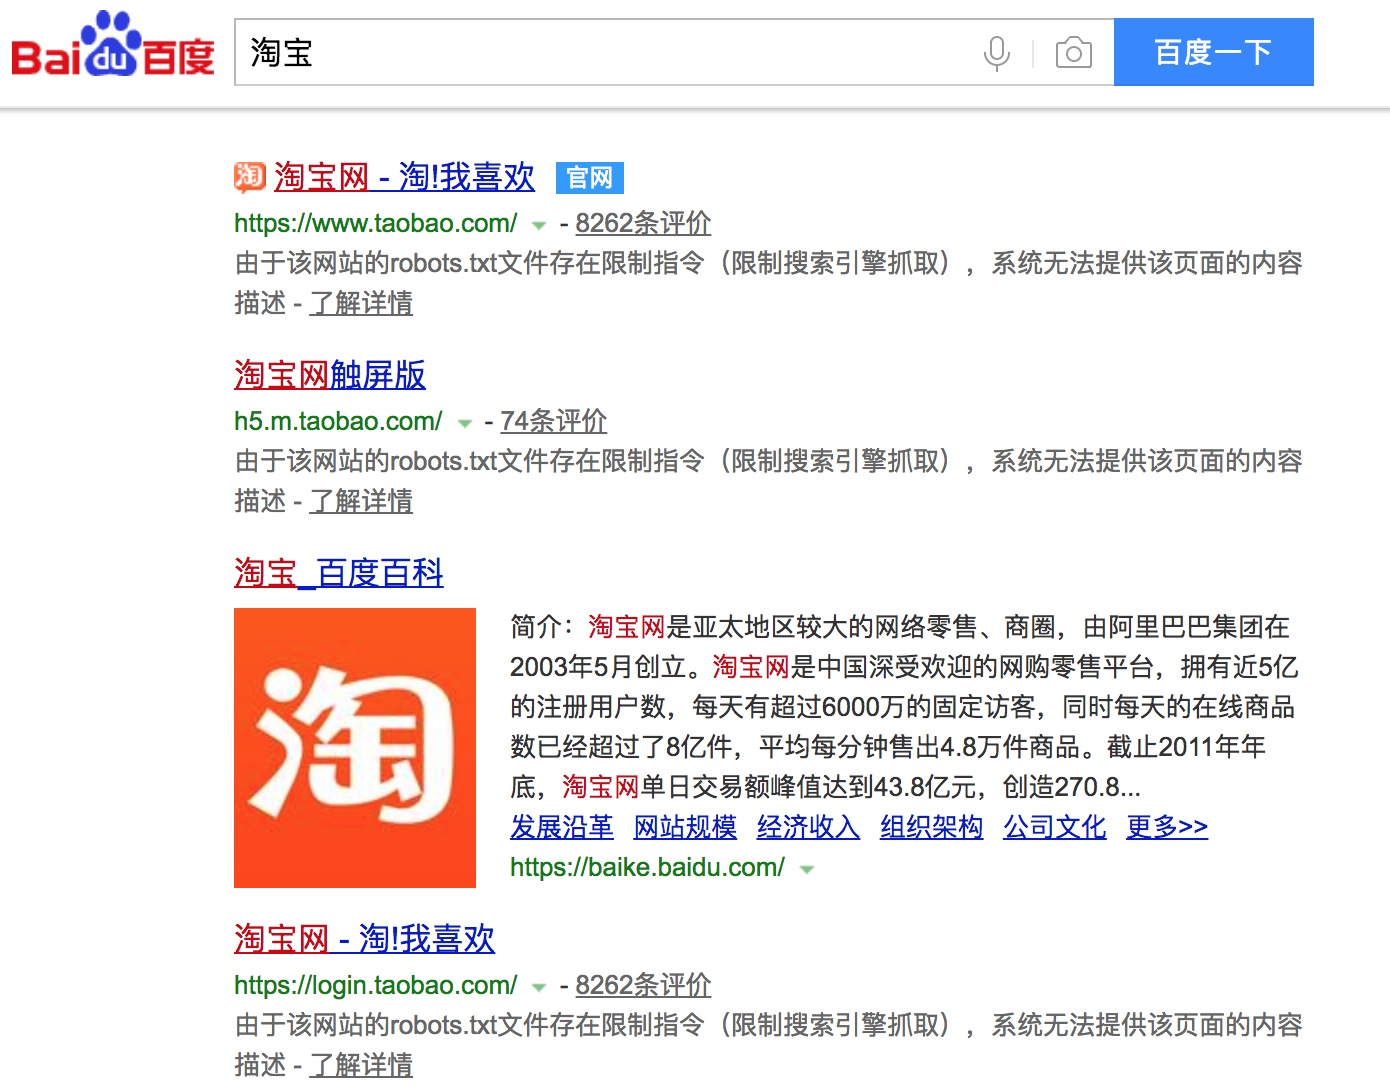 Day66-75/res/baidu-search-taobao.png